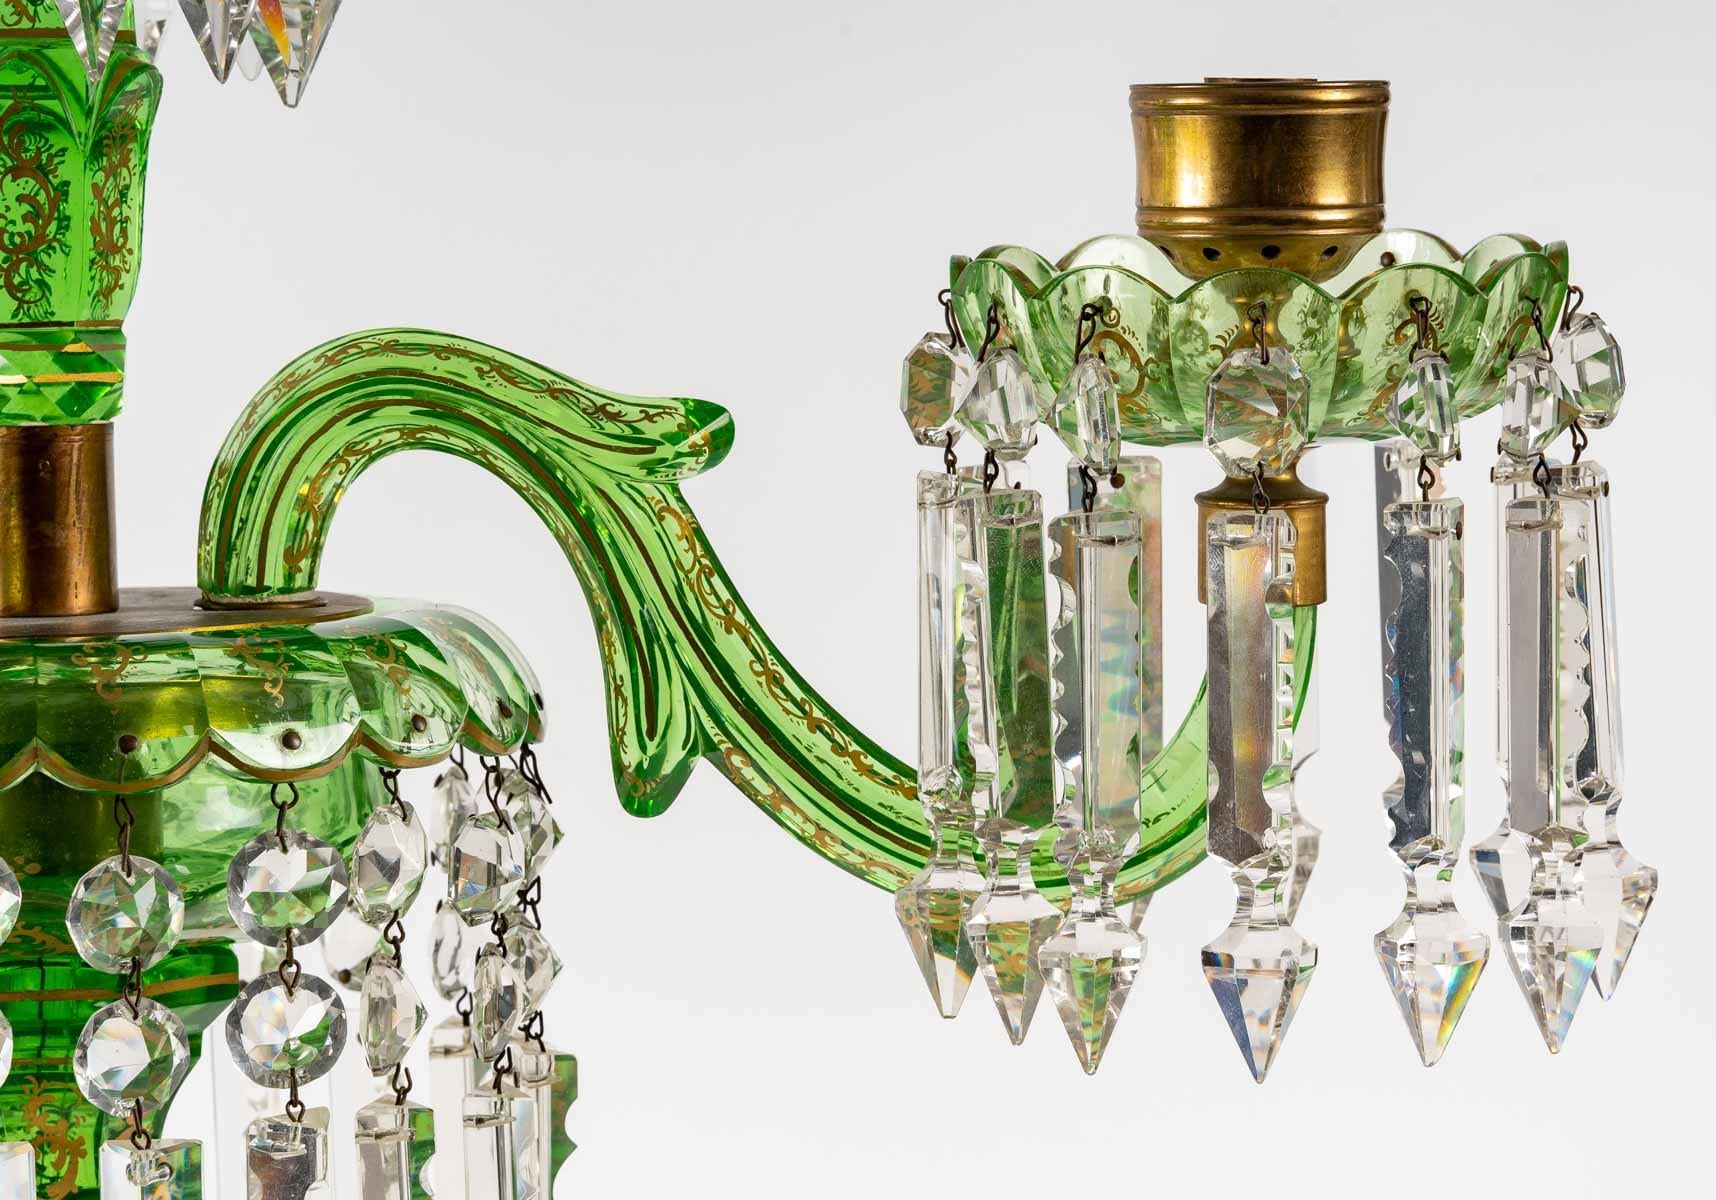 Spectacular pair of Bohemian crystal candelabras, 19th century, emerald color, 4 arms of lights, rich gold decoration.
 